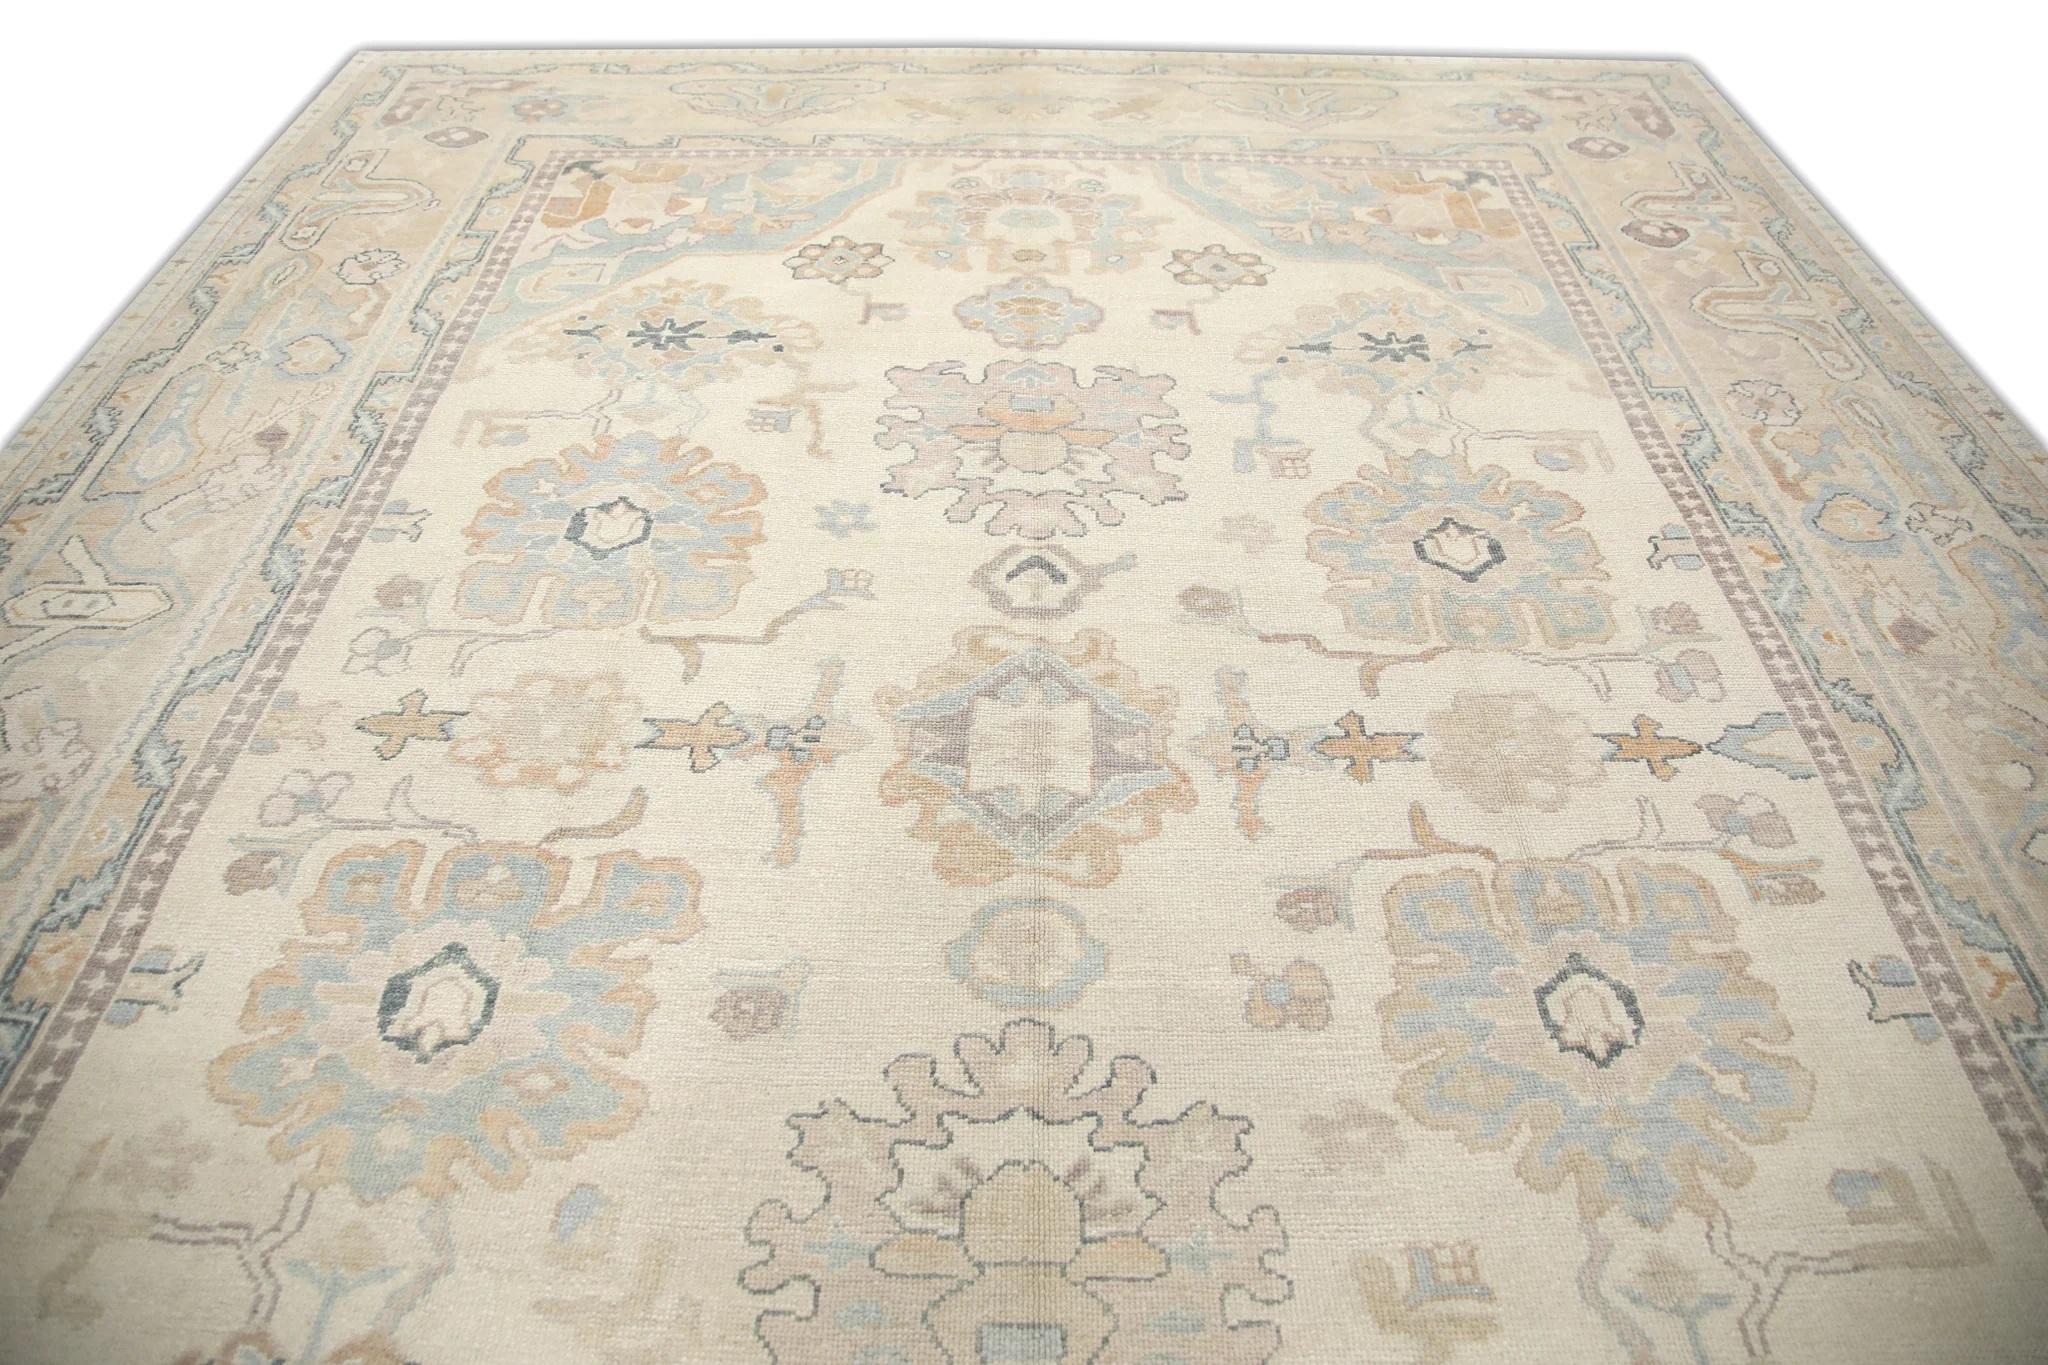 Tan Multicolor Floral Handwoven Wool Oversized Turkish Oushak Rug 11' x 15'3